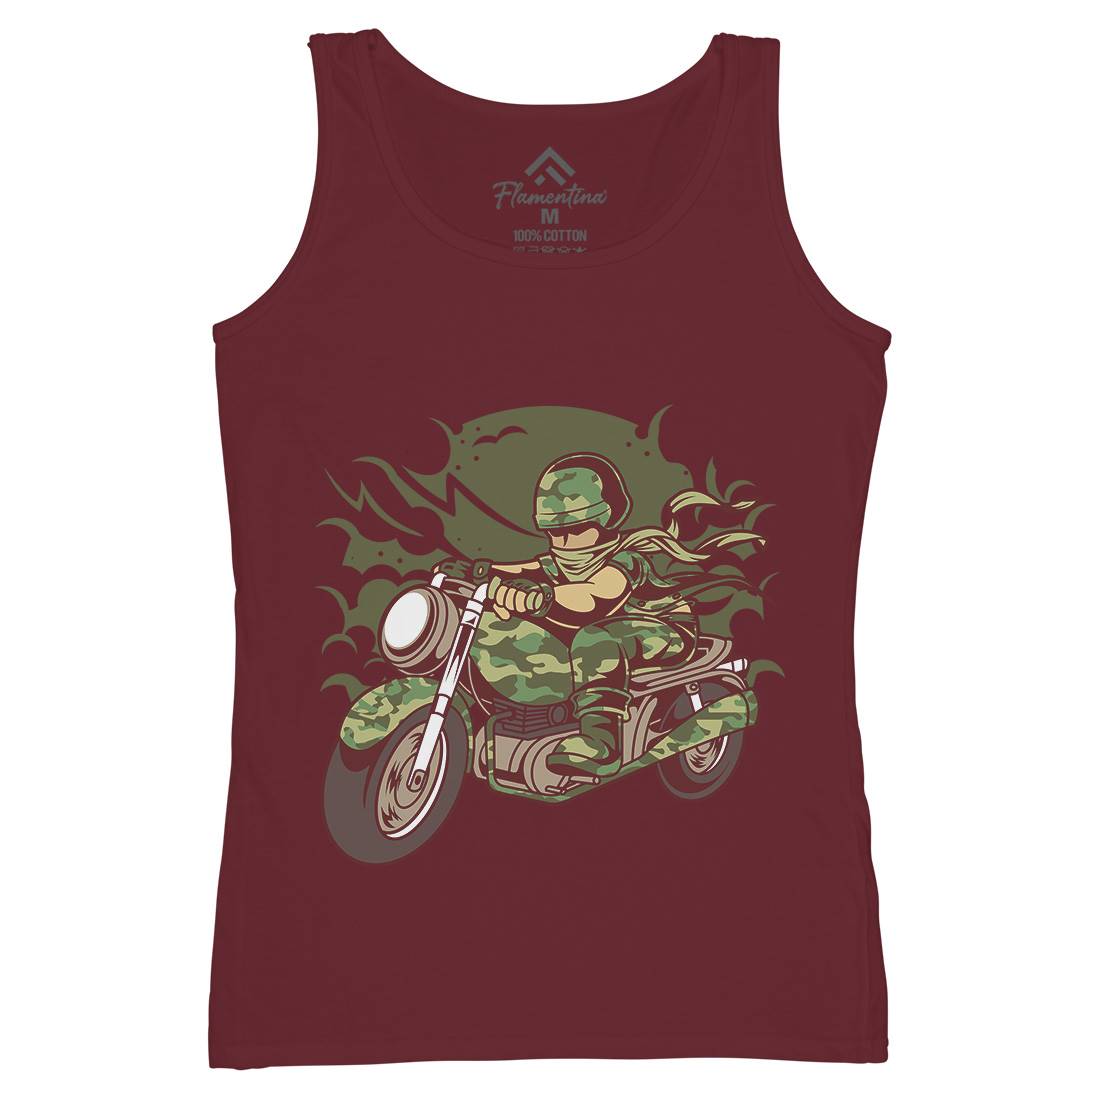 Motorcycle Ride Womens Organic Tank Top Vest Army C306